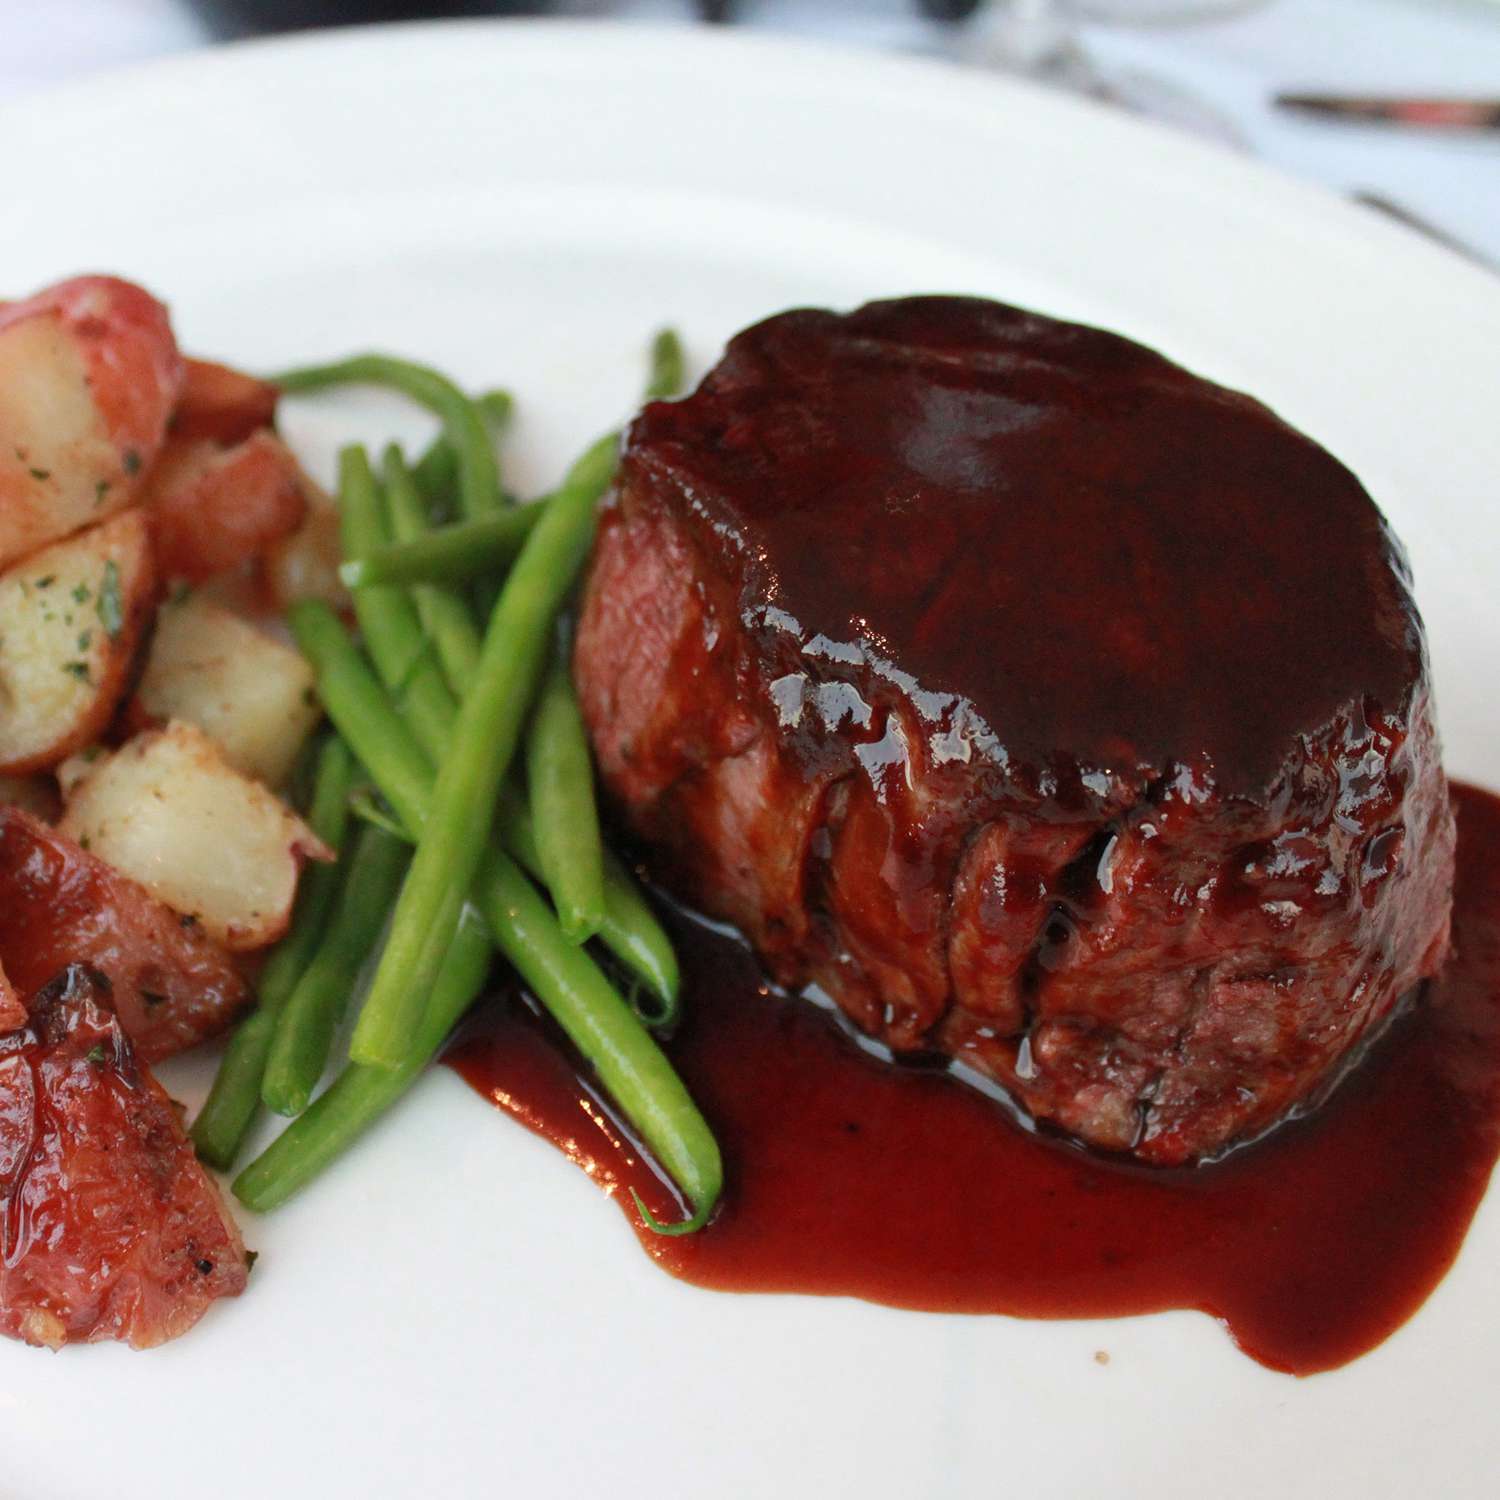 close up view of Filet Mignon with Rich Balsamic Glaze, served with red potatoes and green beans on a white plate